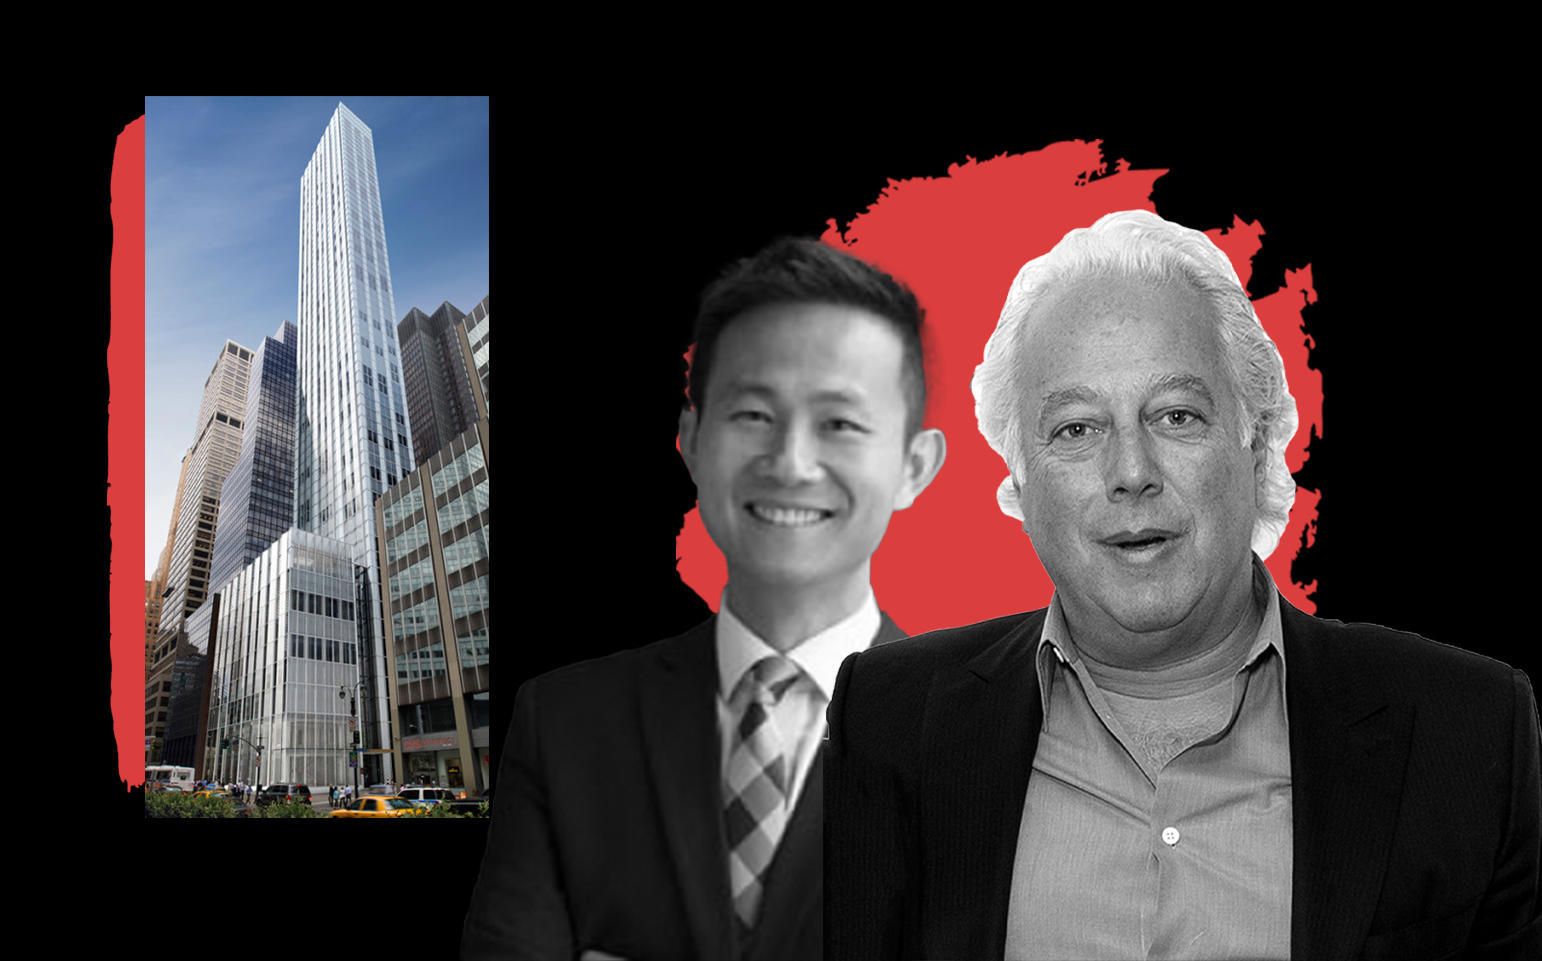 100 East 53rd Street,  Vanke US managing director Kai-yan Lee, and RFR's Aby Rosen (Photos via Structure Tone and Getty)